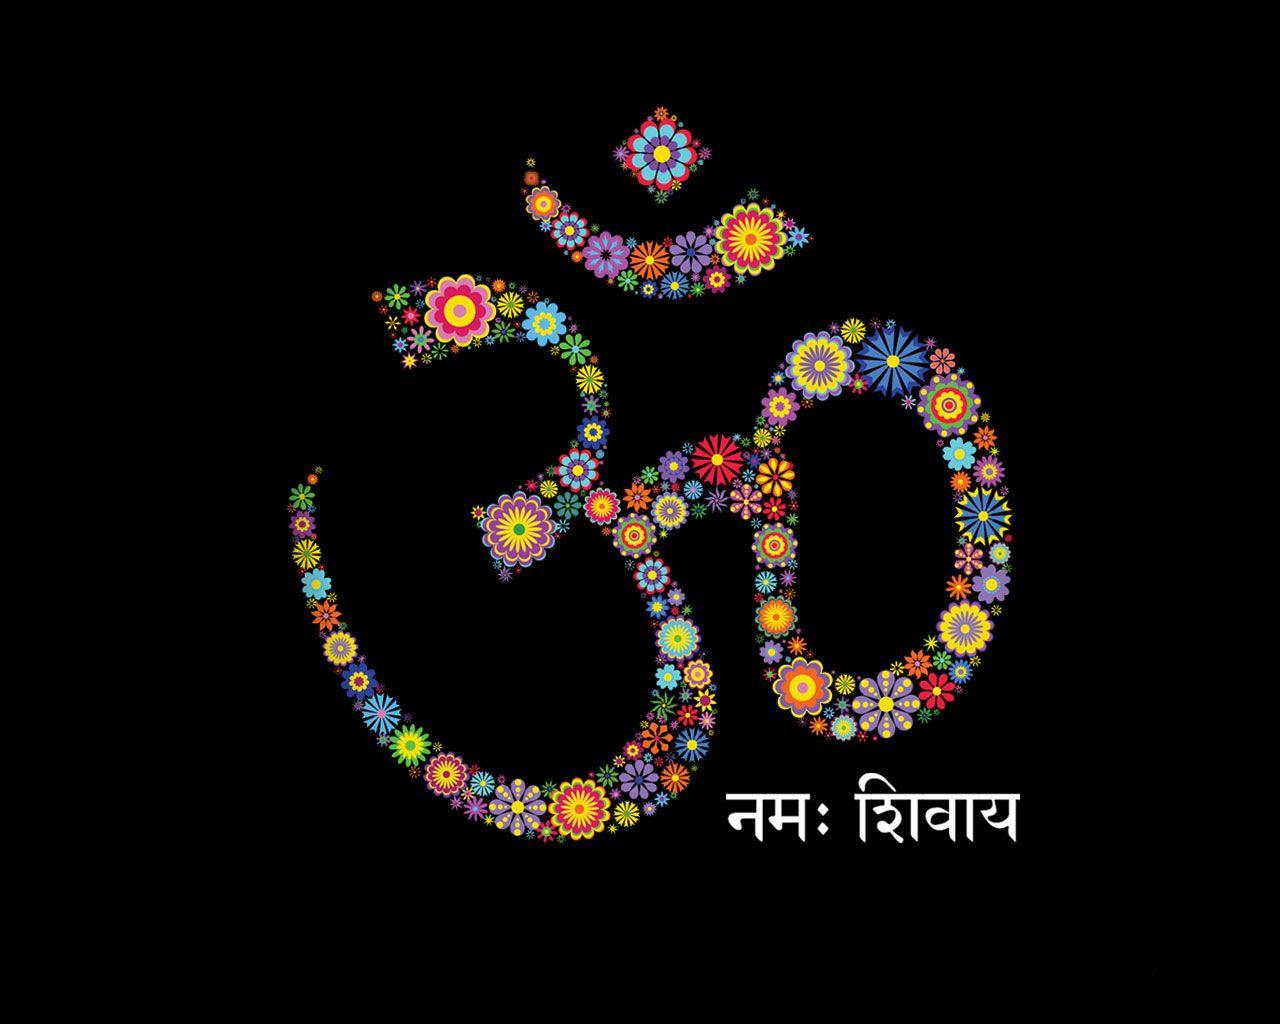 Religious Symbol Om and its meaning. Religious symbols, Om